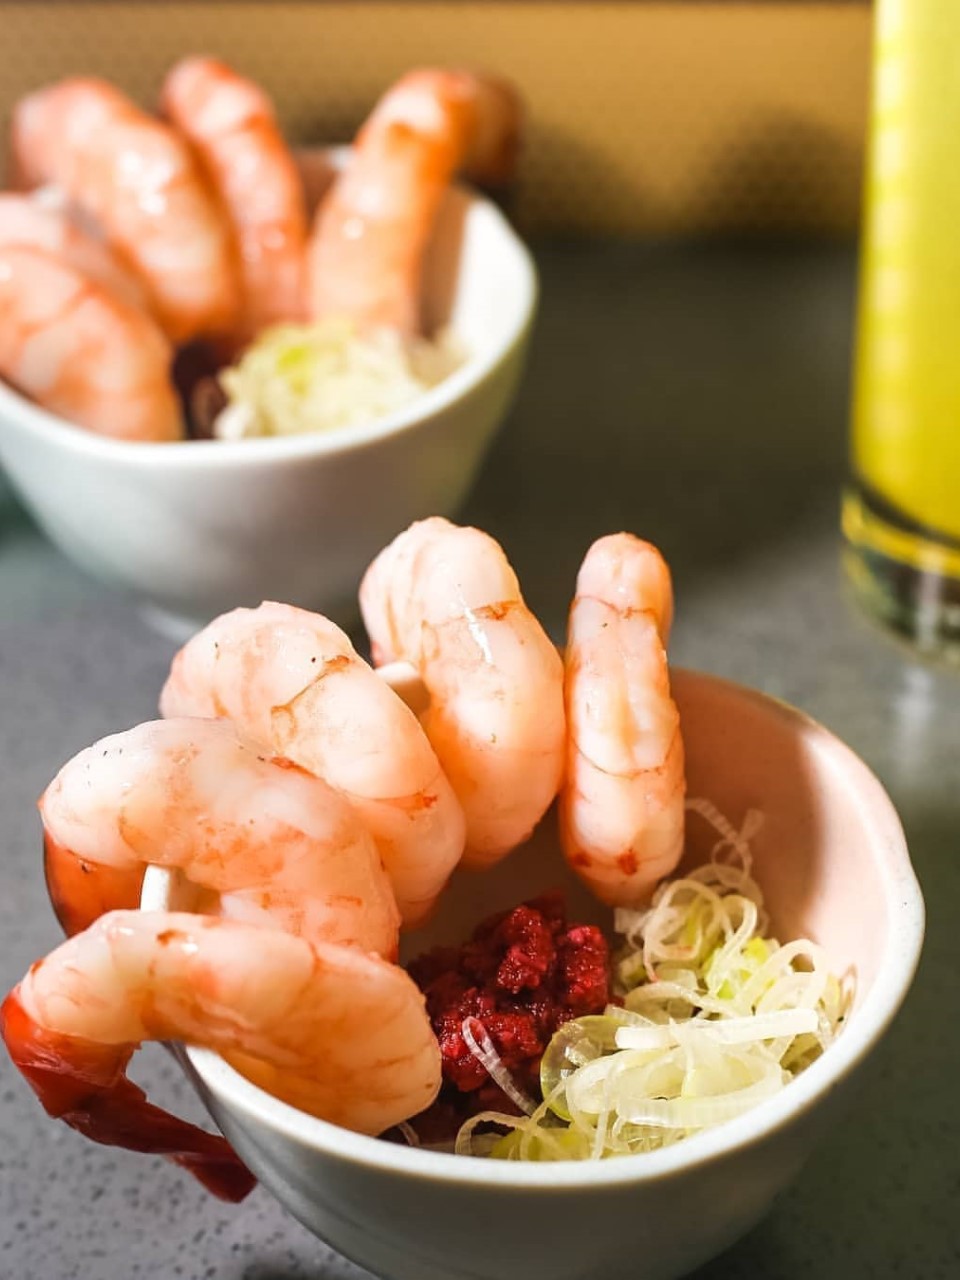 Two portions of prawn cocktails